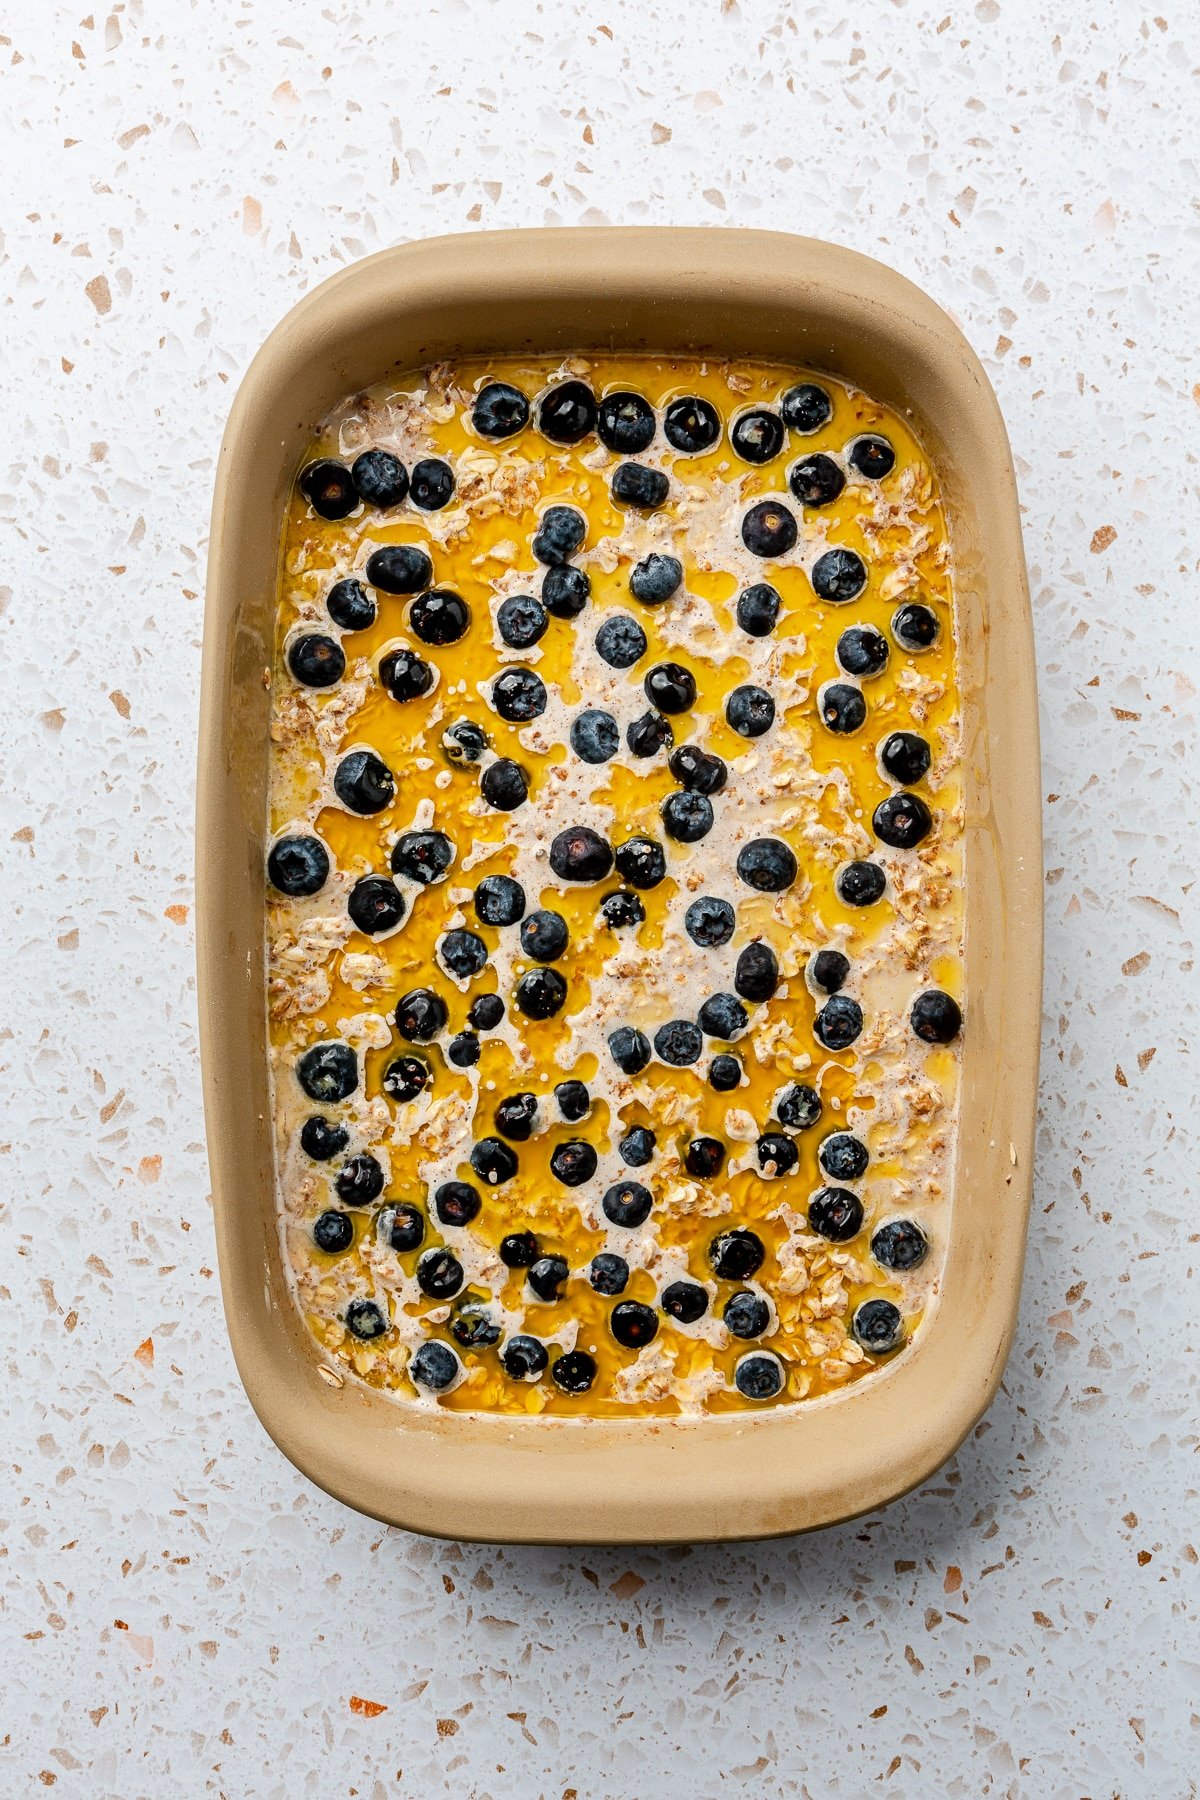 The liquid ingredients have been added over the top of the dry in the beige-colored baking dish. It has been topped with blueberries.